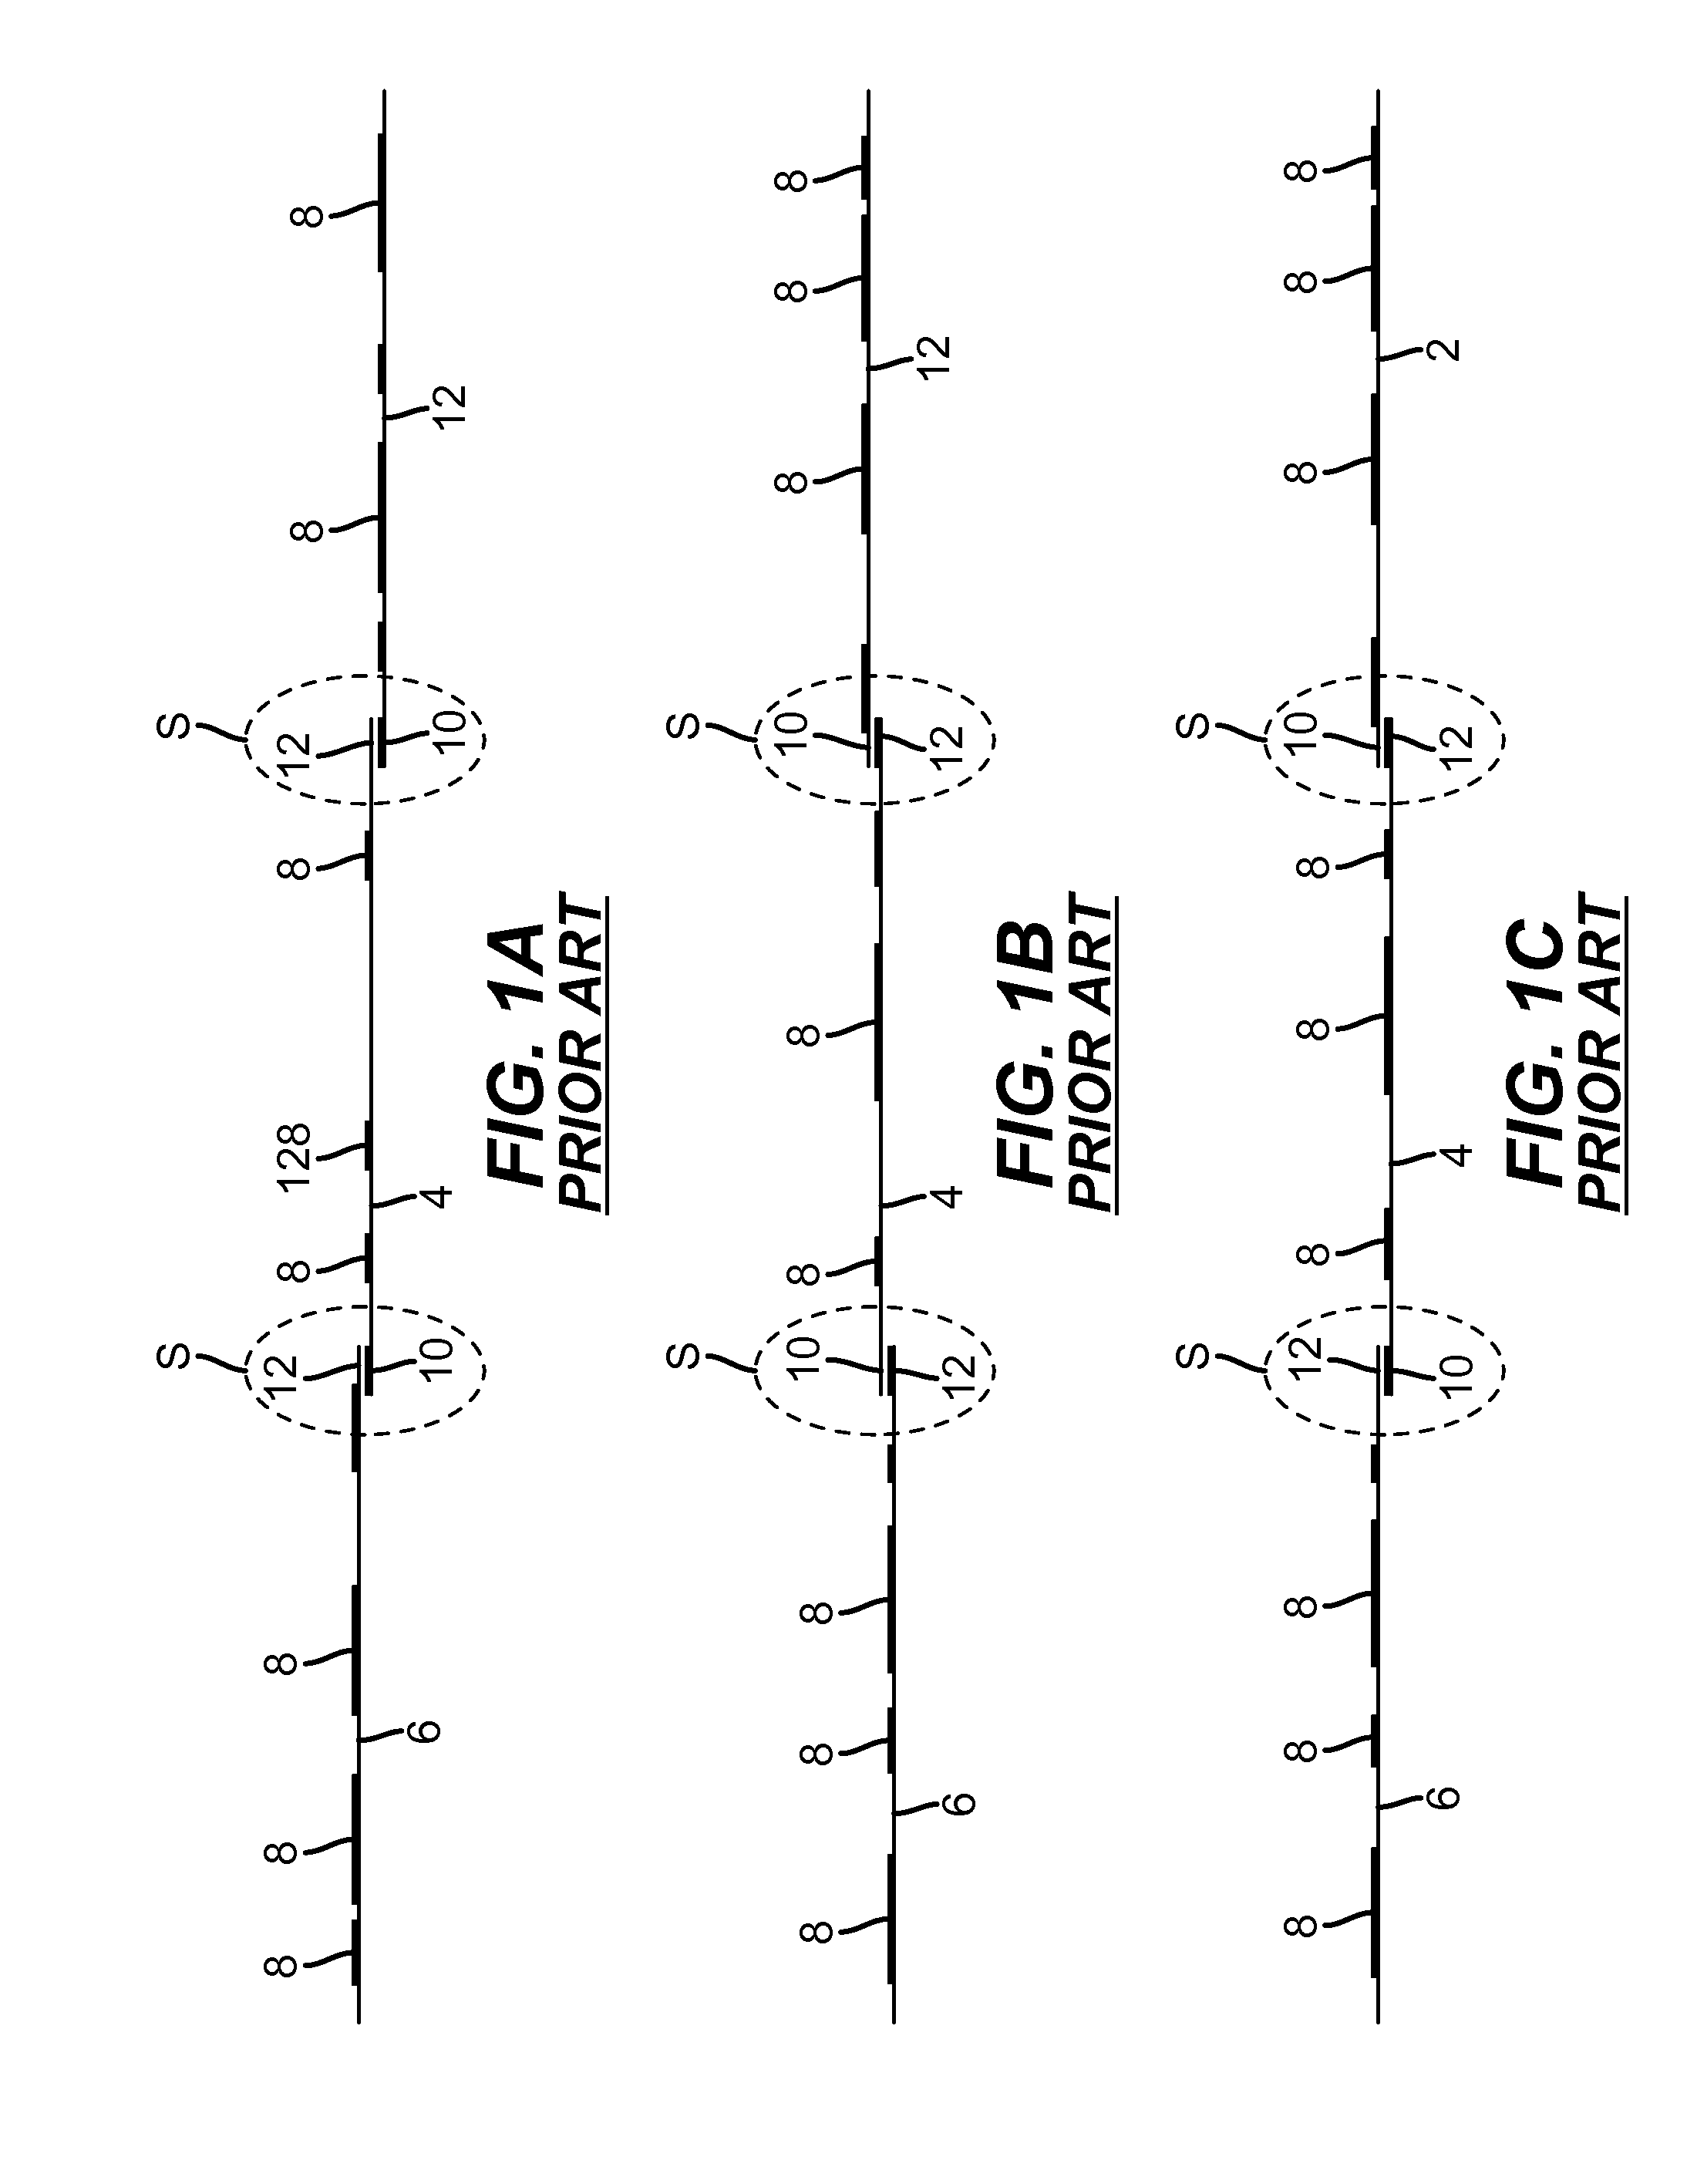 Apparatus for making combination prints with pleasing appearance